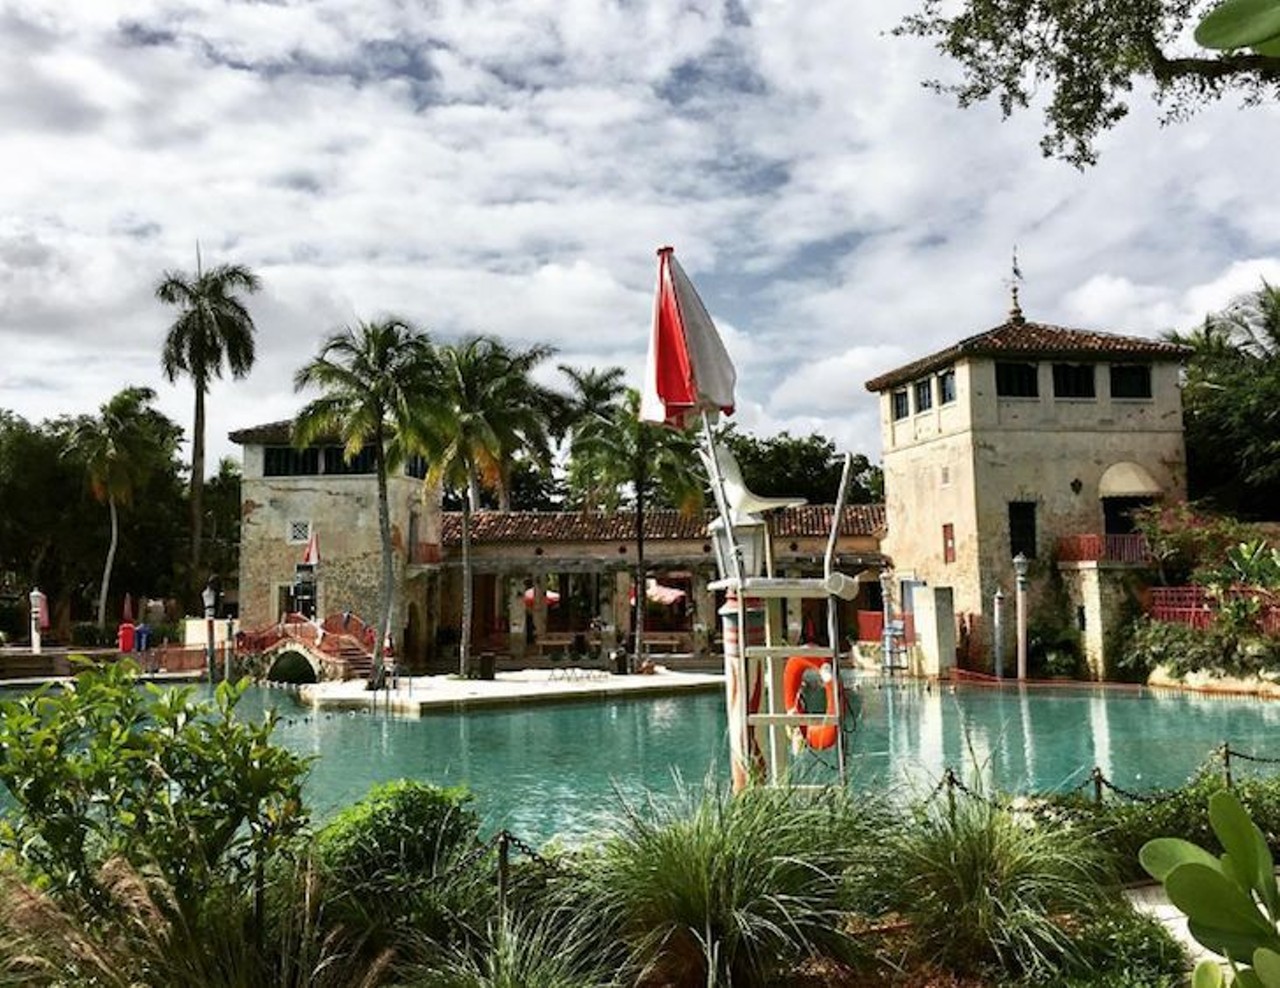 Venetian Pools
2701 De Soto Blvd., Coral Gables, (305) 460-5306
Created from a coral rock quarry in the 1920s, these crystal-clear pools will definitely have you feeling like you&#146;re Italian royalty. 
Photo via freezingthelight/Instagram